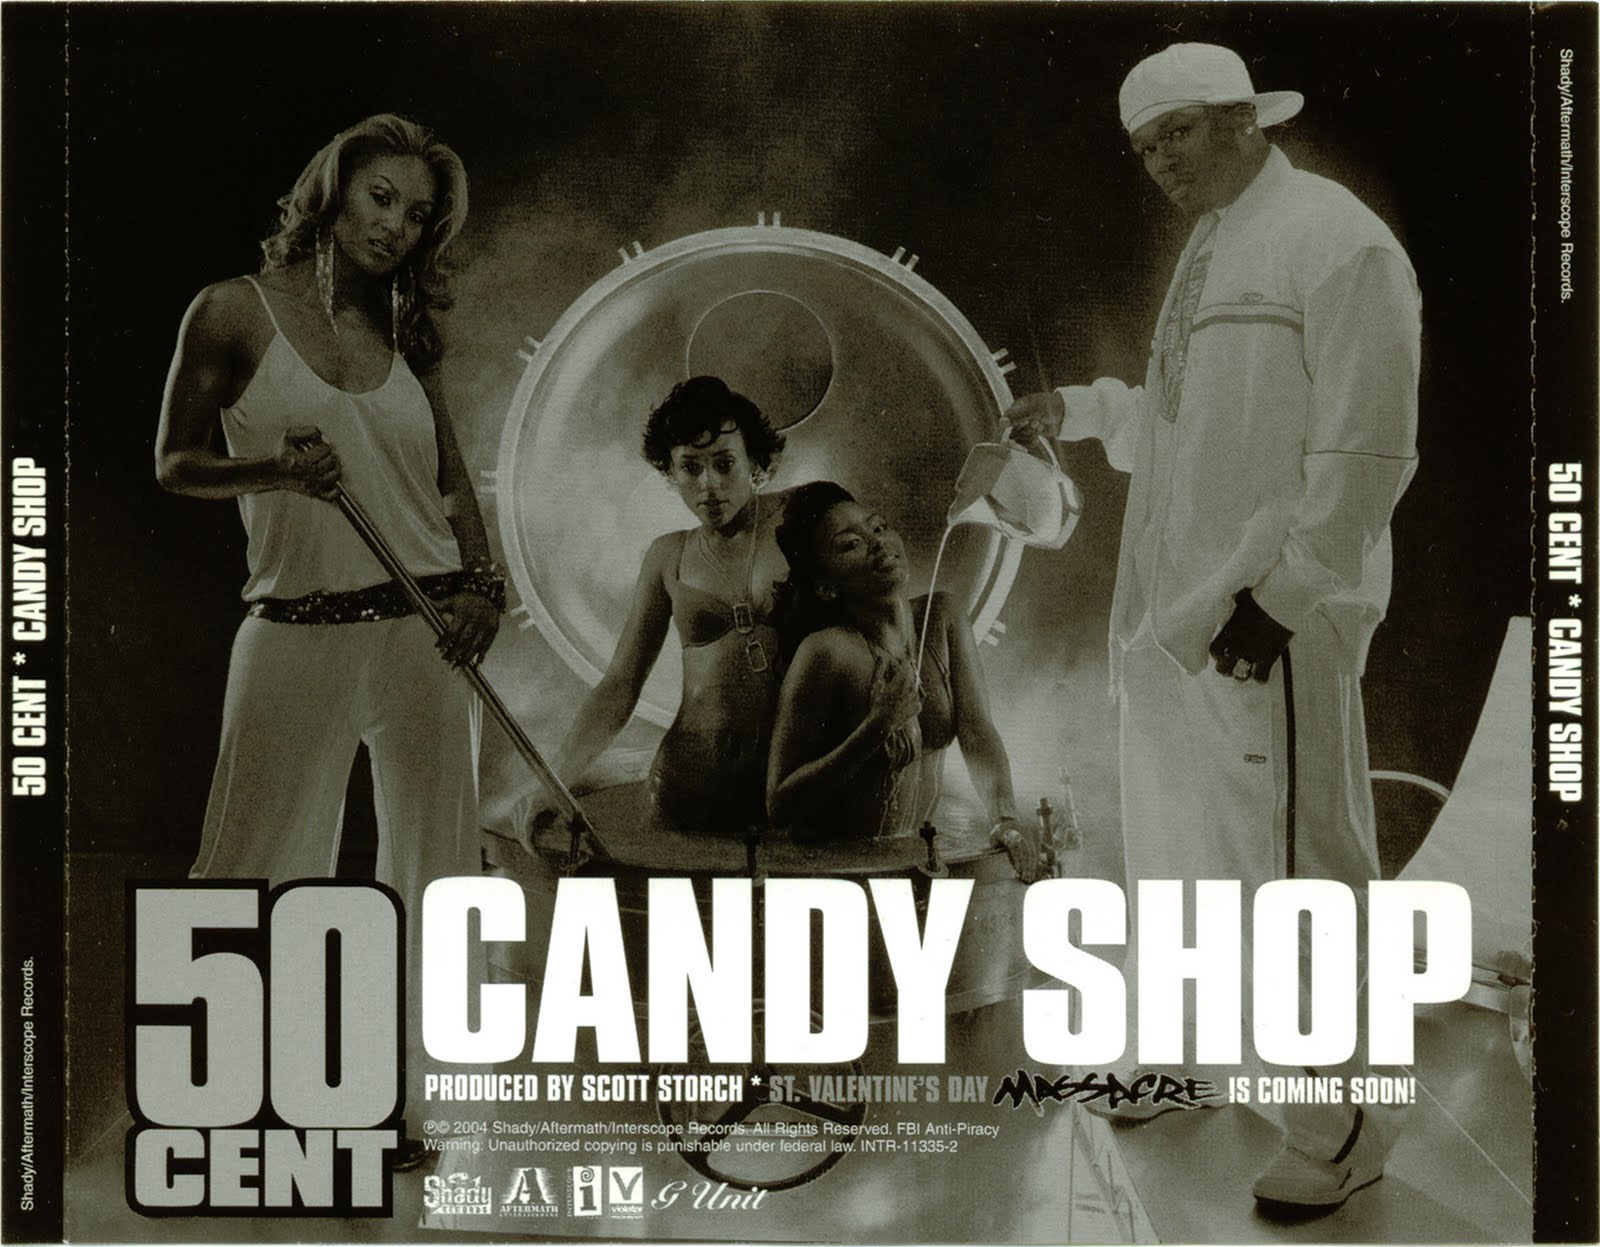 candy shop mp3 download